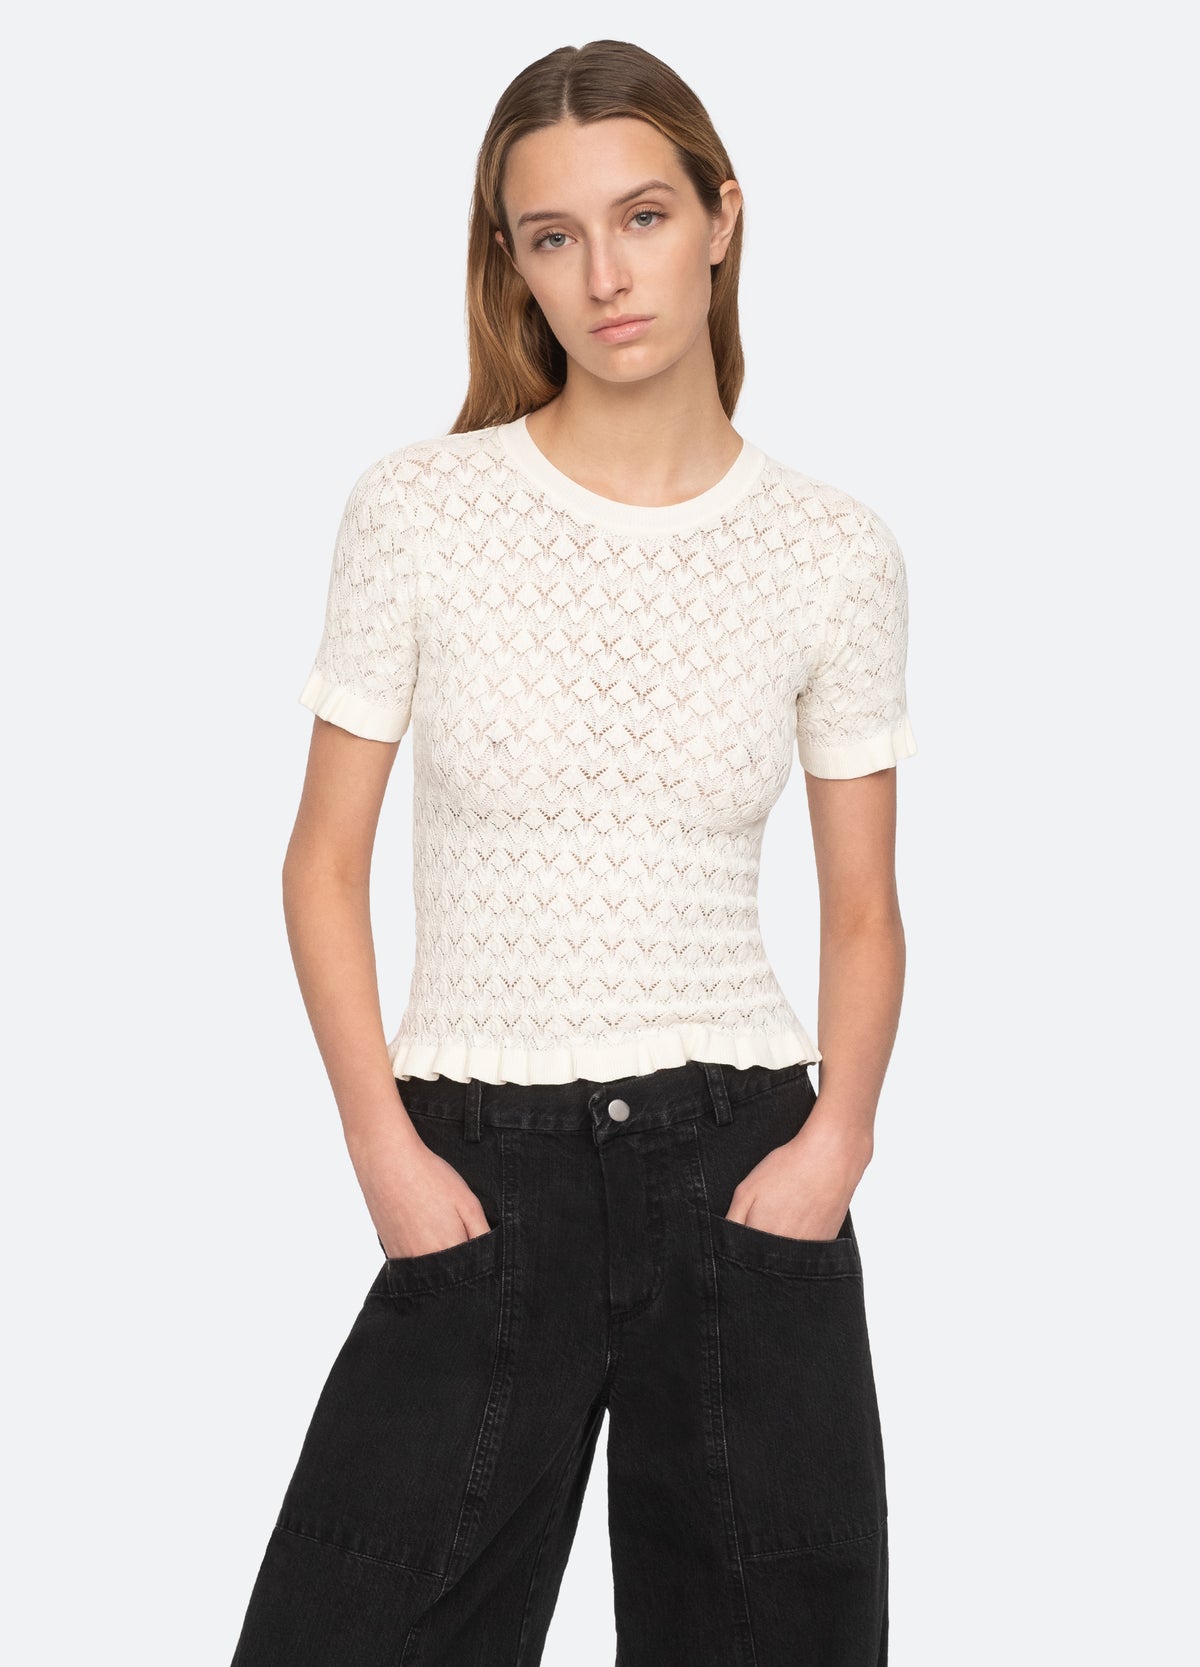 cream-rue s/s sweater-front view 2 - 8